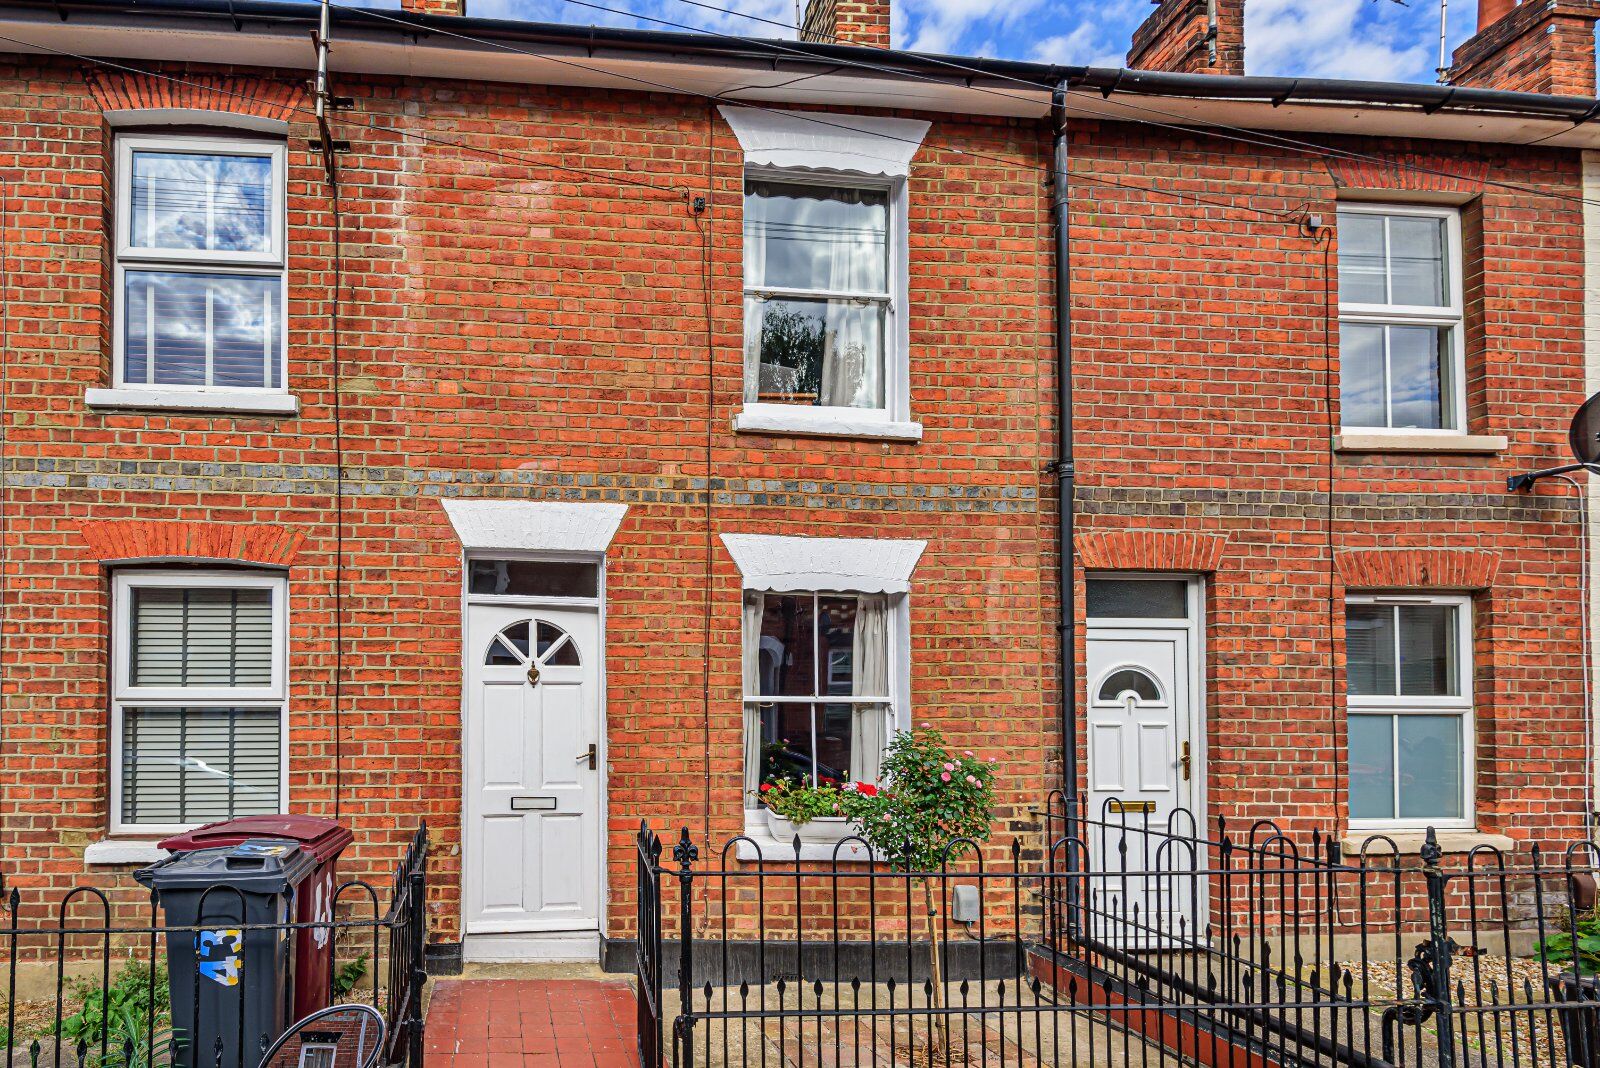 2 bedroom mid terraced house for sale Sherman Road, Reading, RG1, main image